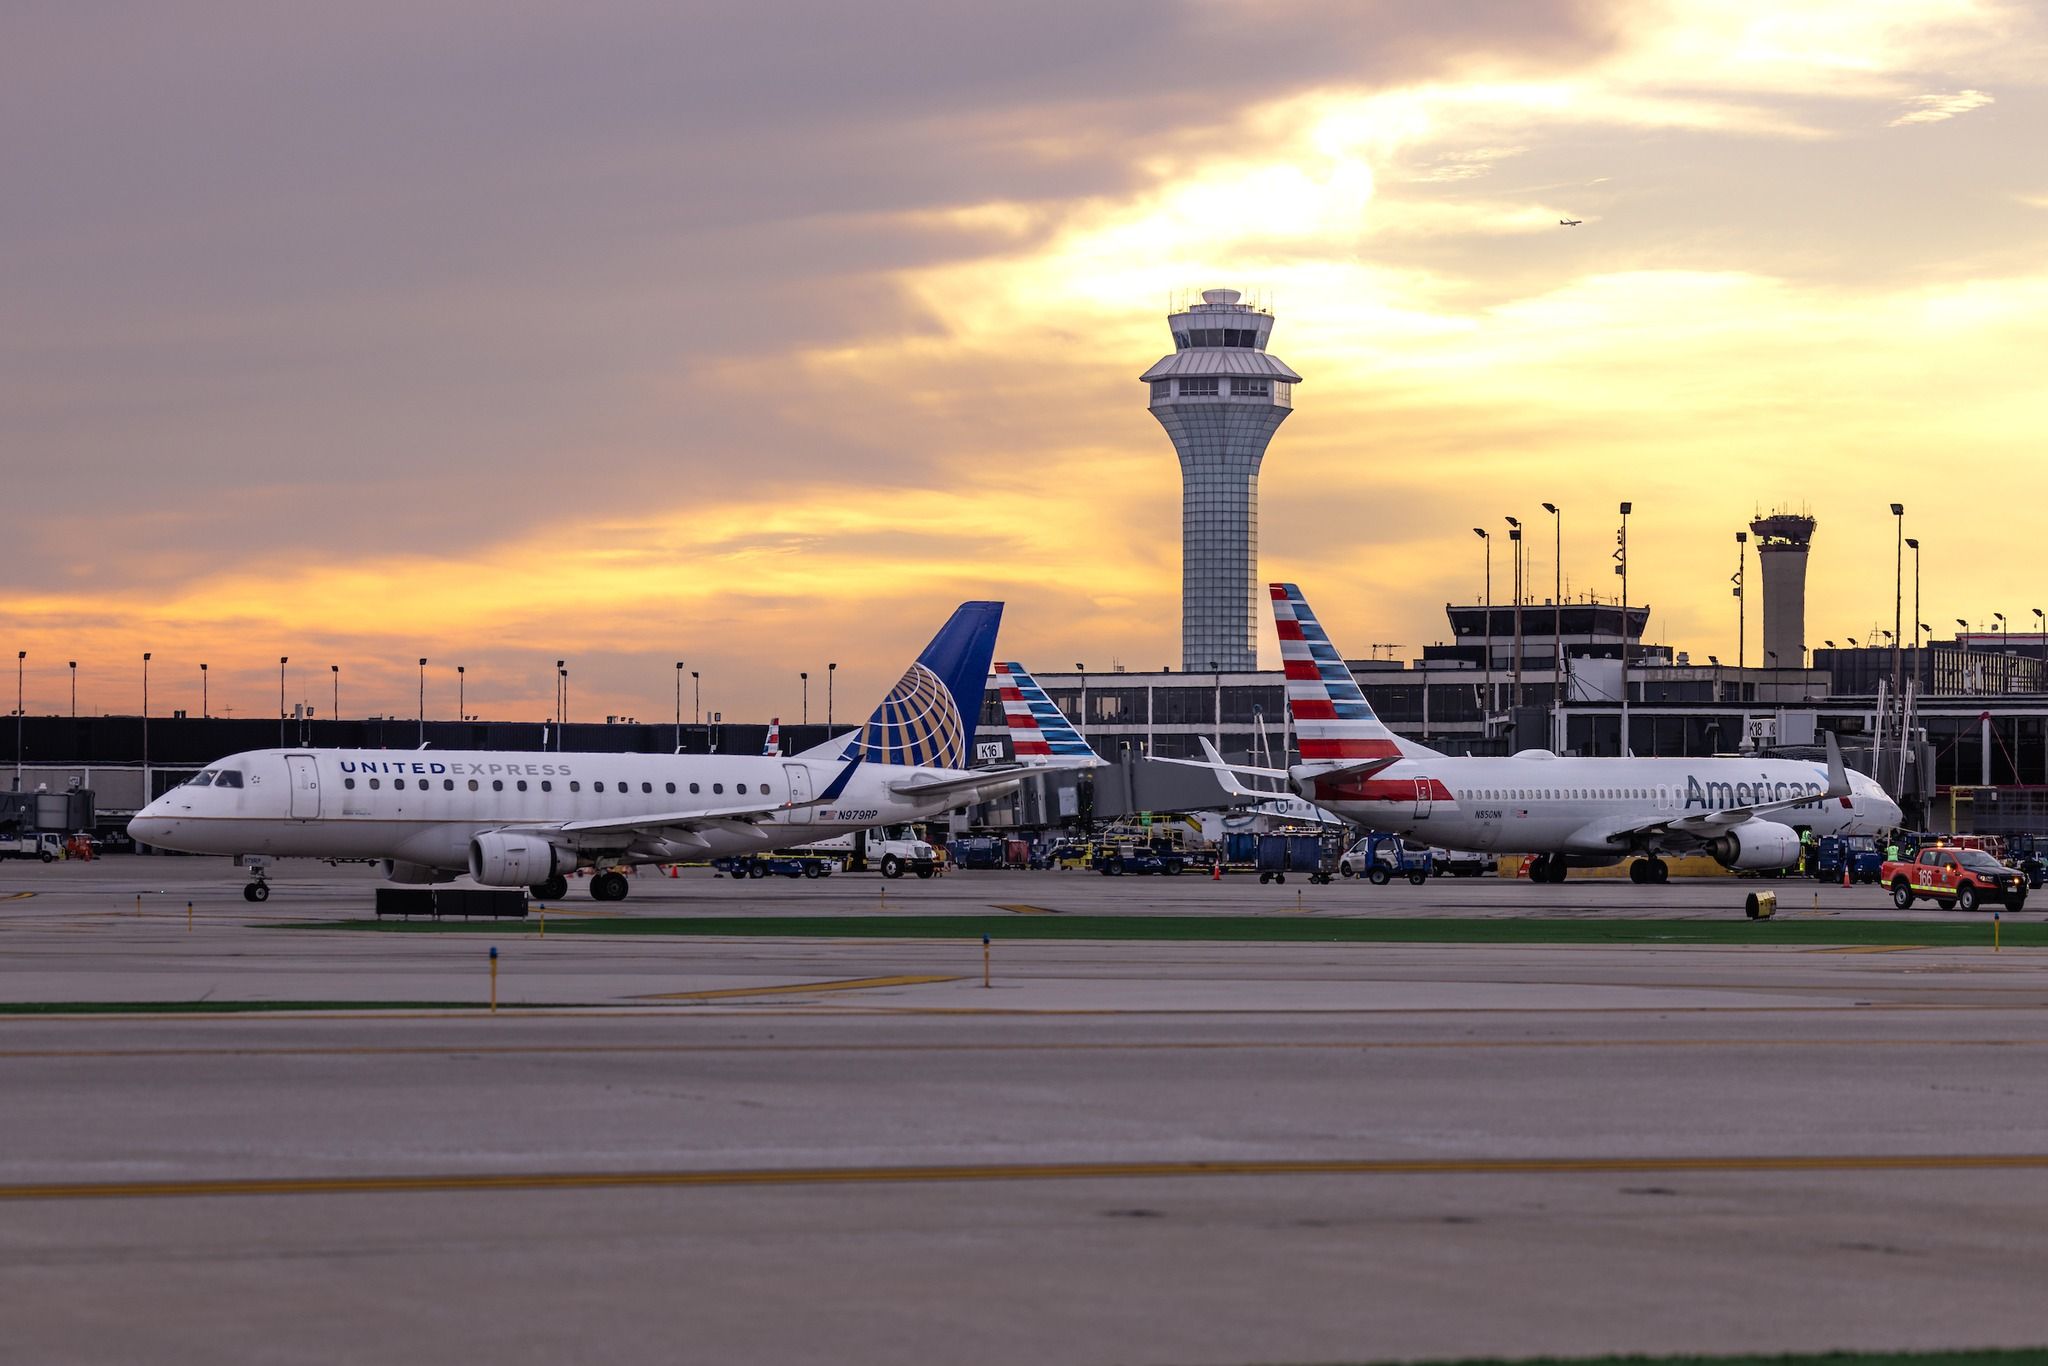 United Airlines and American Airlines aircraft at Chicago O'Hare International Airport.